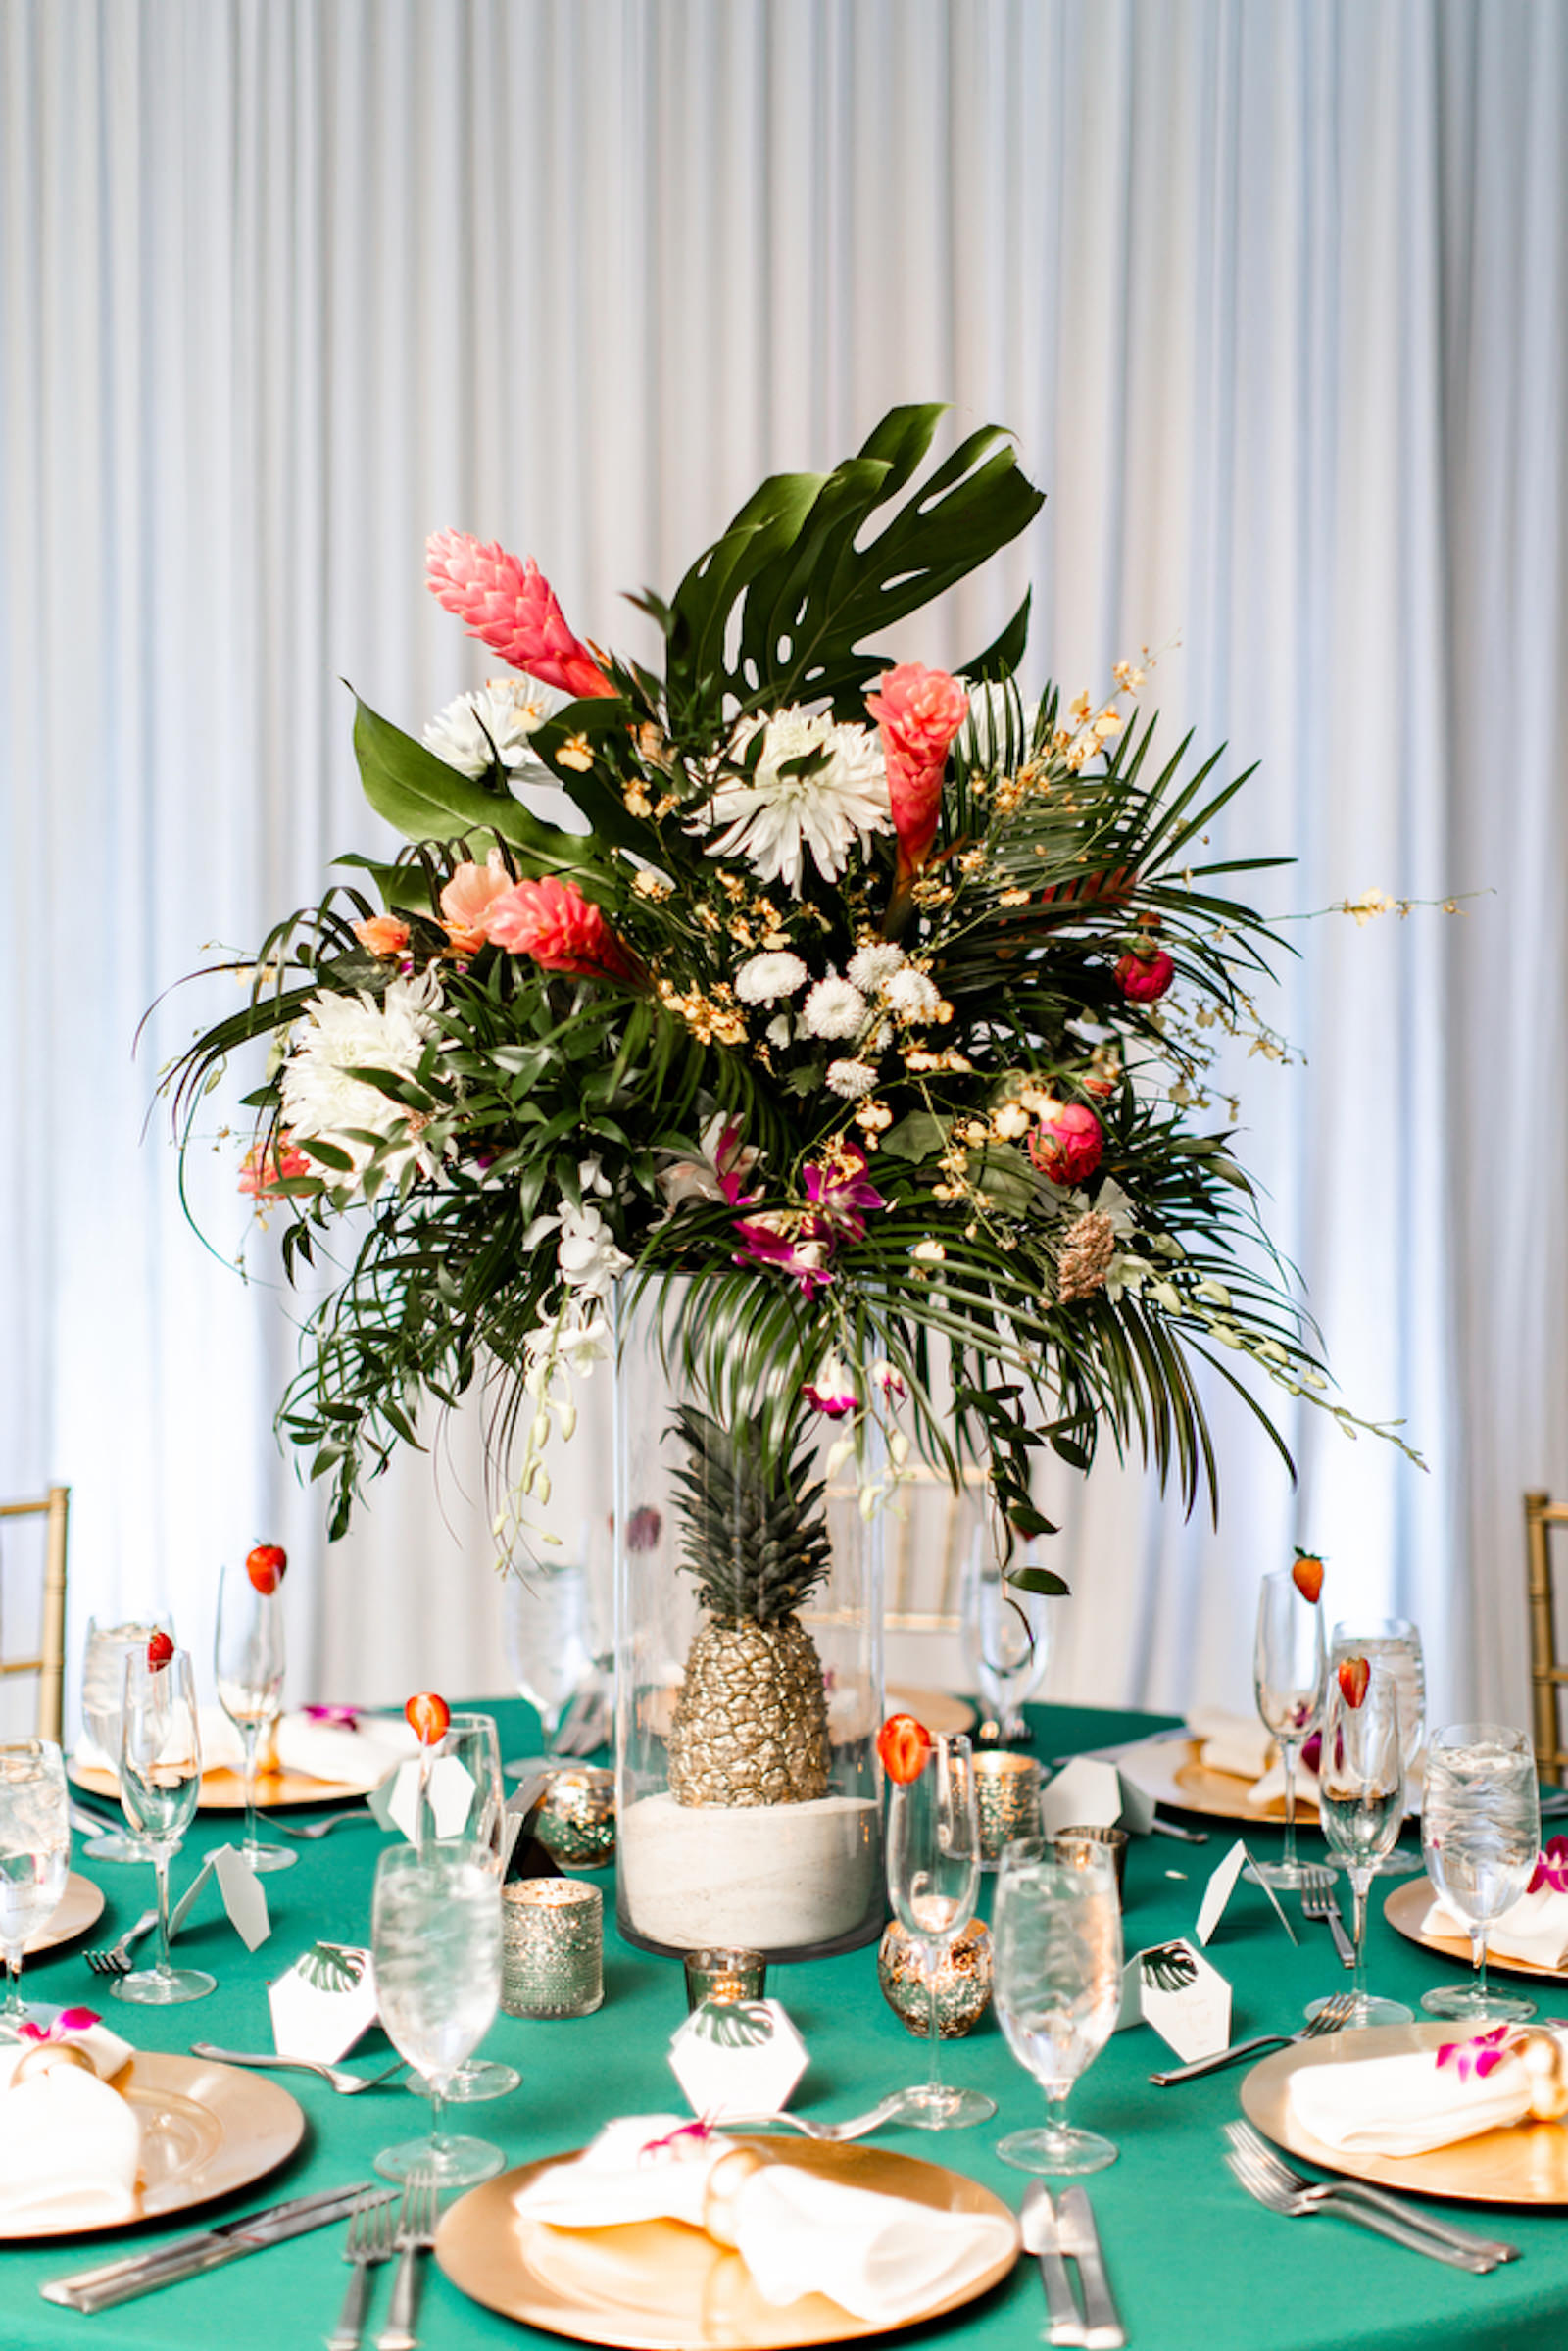 Tropical Elegant Wedding Reception Decor, Teal Tablecloths, Gold Chargers, Tall Floral Centerpiece, Clear Hurricane Glass Vase with Sand and Gold Pineapple, Monstera and Palm Tree Leaves, Pink Ginger, Purple Orchids, White Florals Centerpiece | Tampa Bay Wedding Planner Special Moments Event Planning